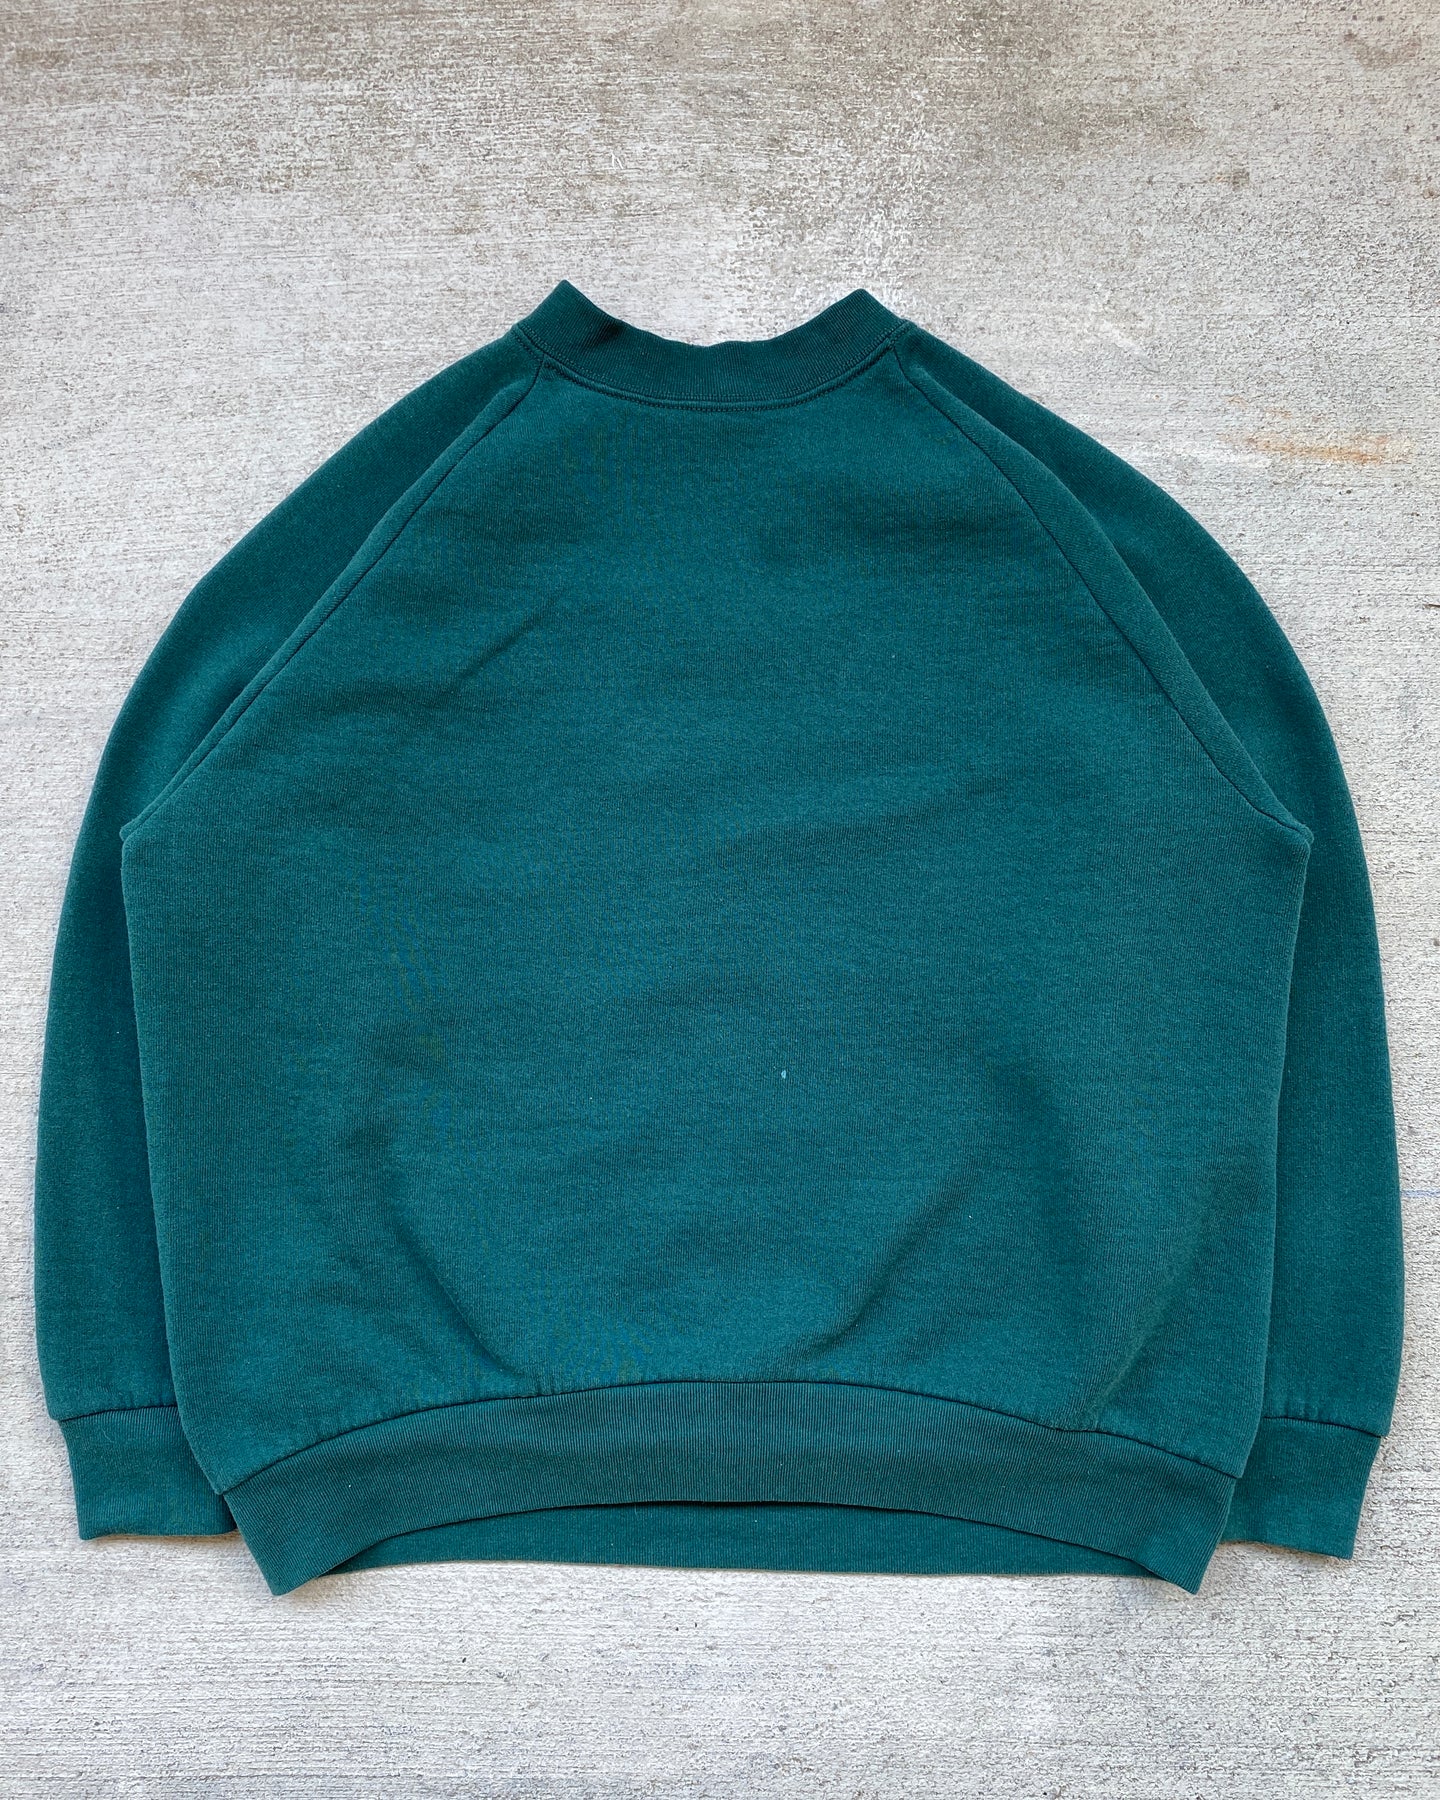 1990s Fruit of the Loom Forest Raglan Cut Crewneck - Size Large